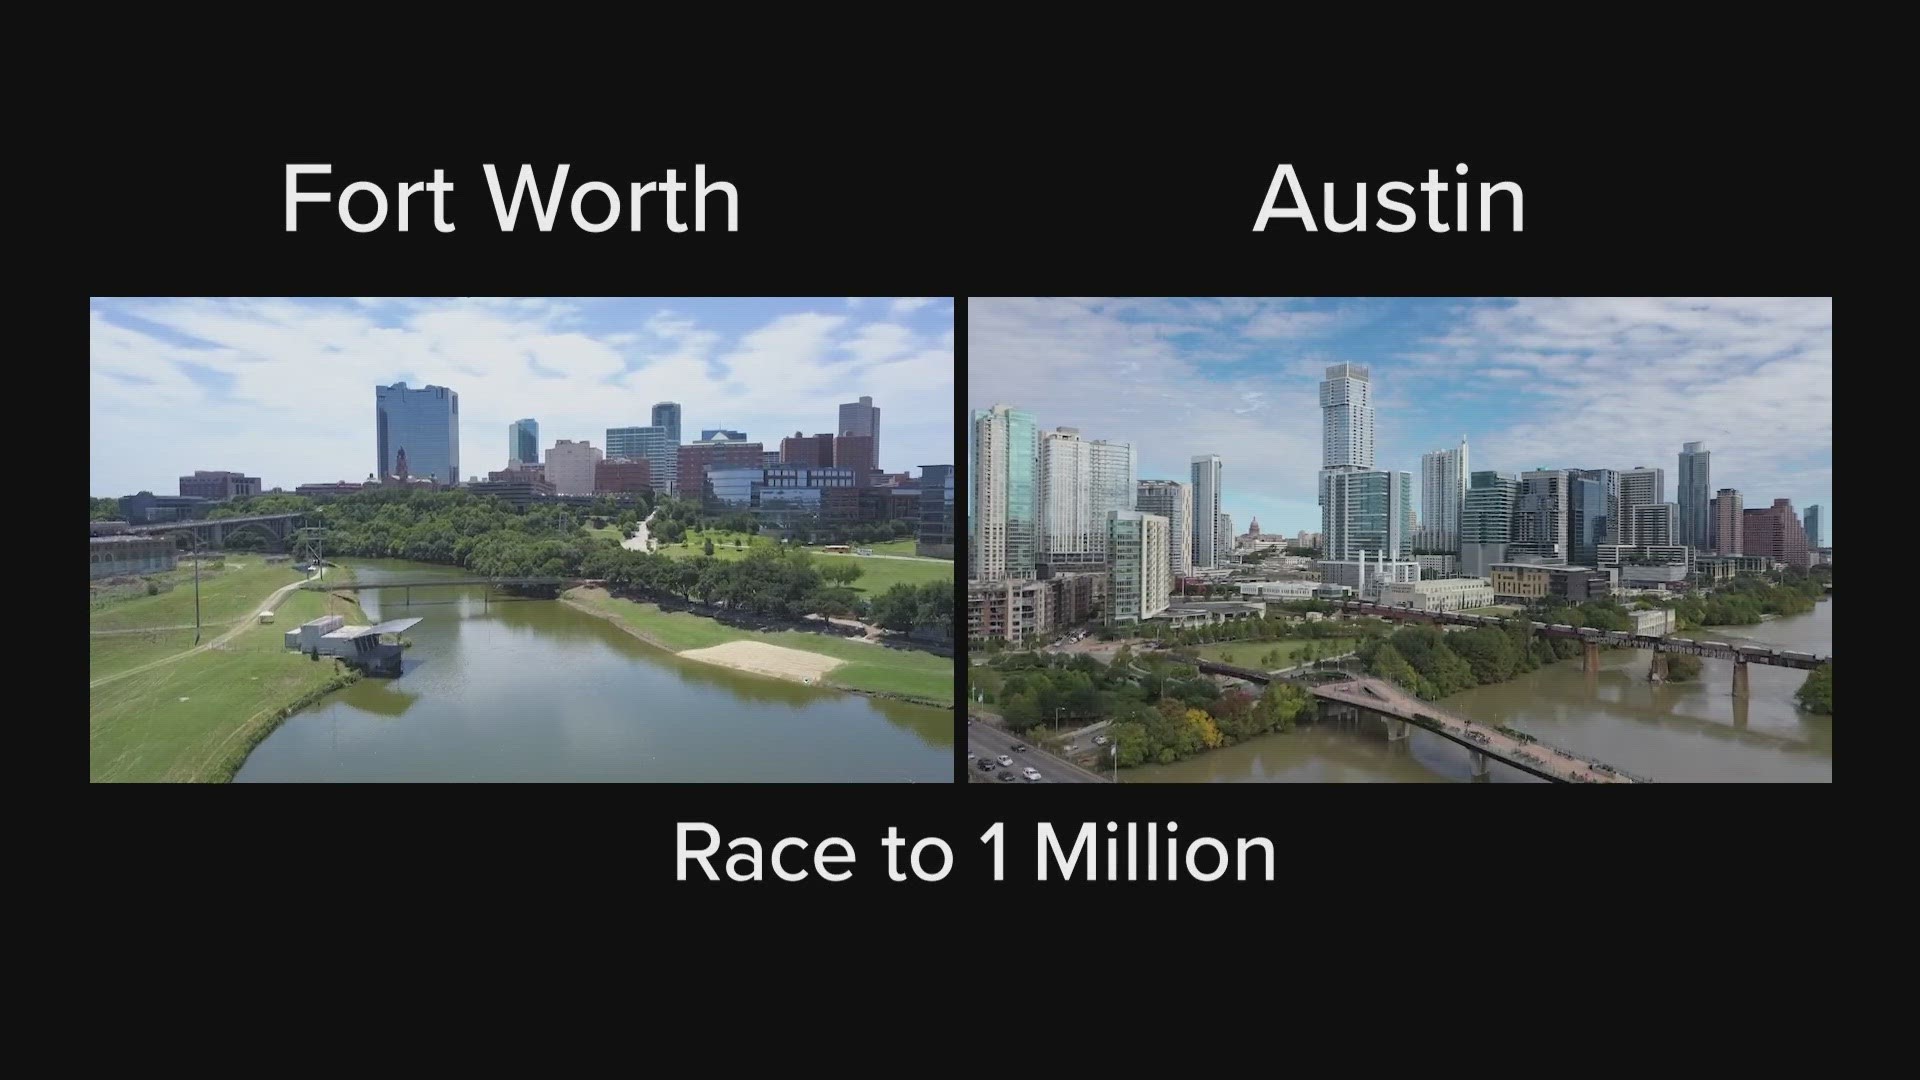 New census estimates peg Austin's population at 974,447 and Fort Worth's population at 956,709. But 'Funkytown' is gaining ground.